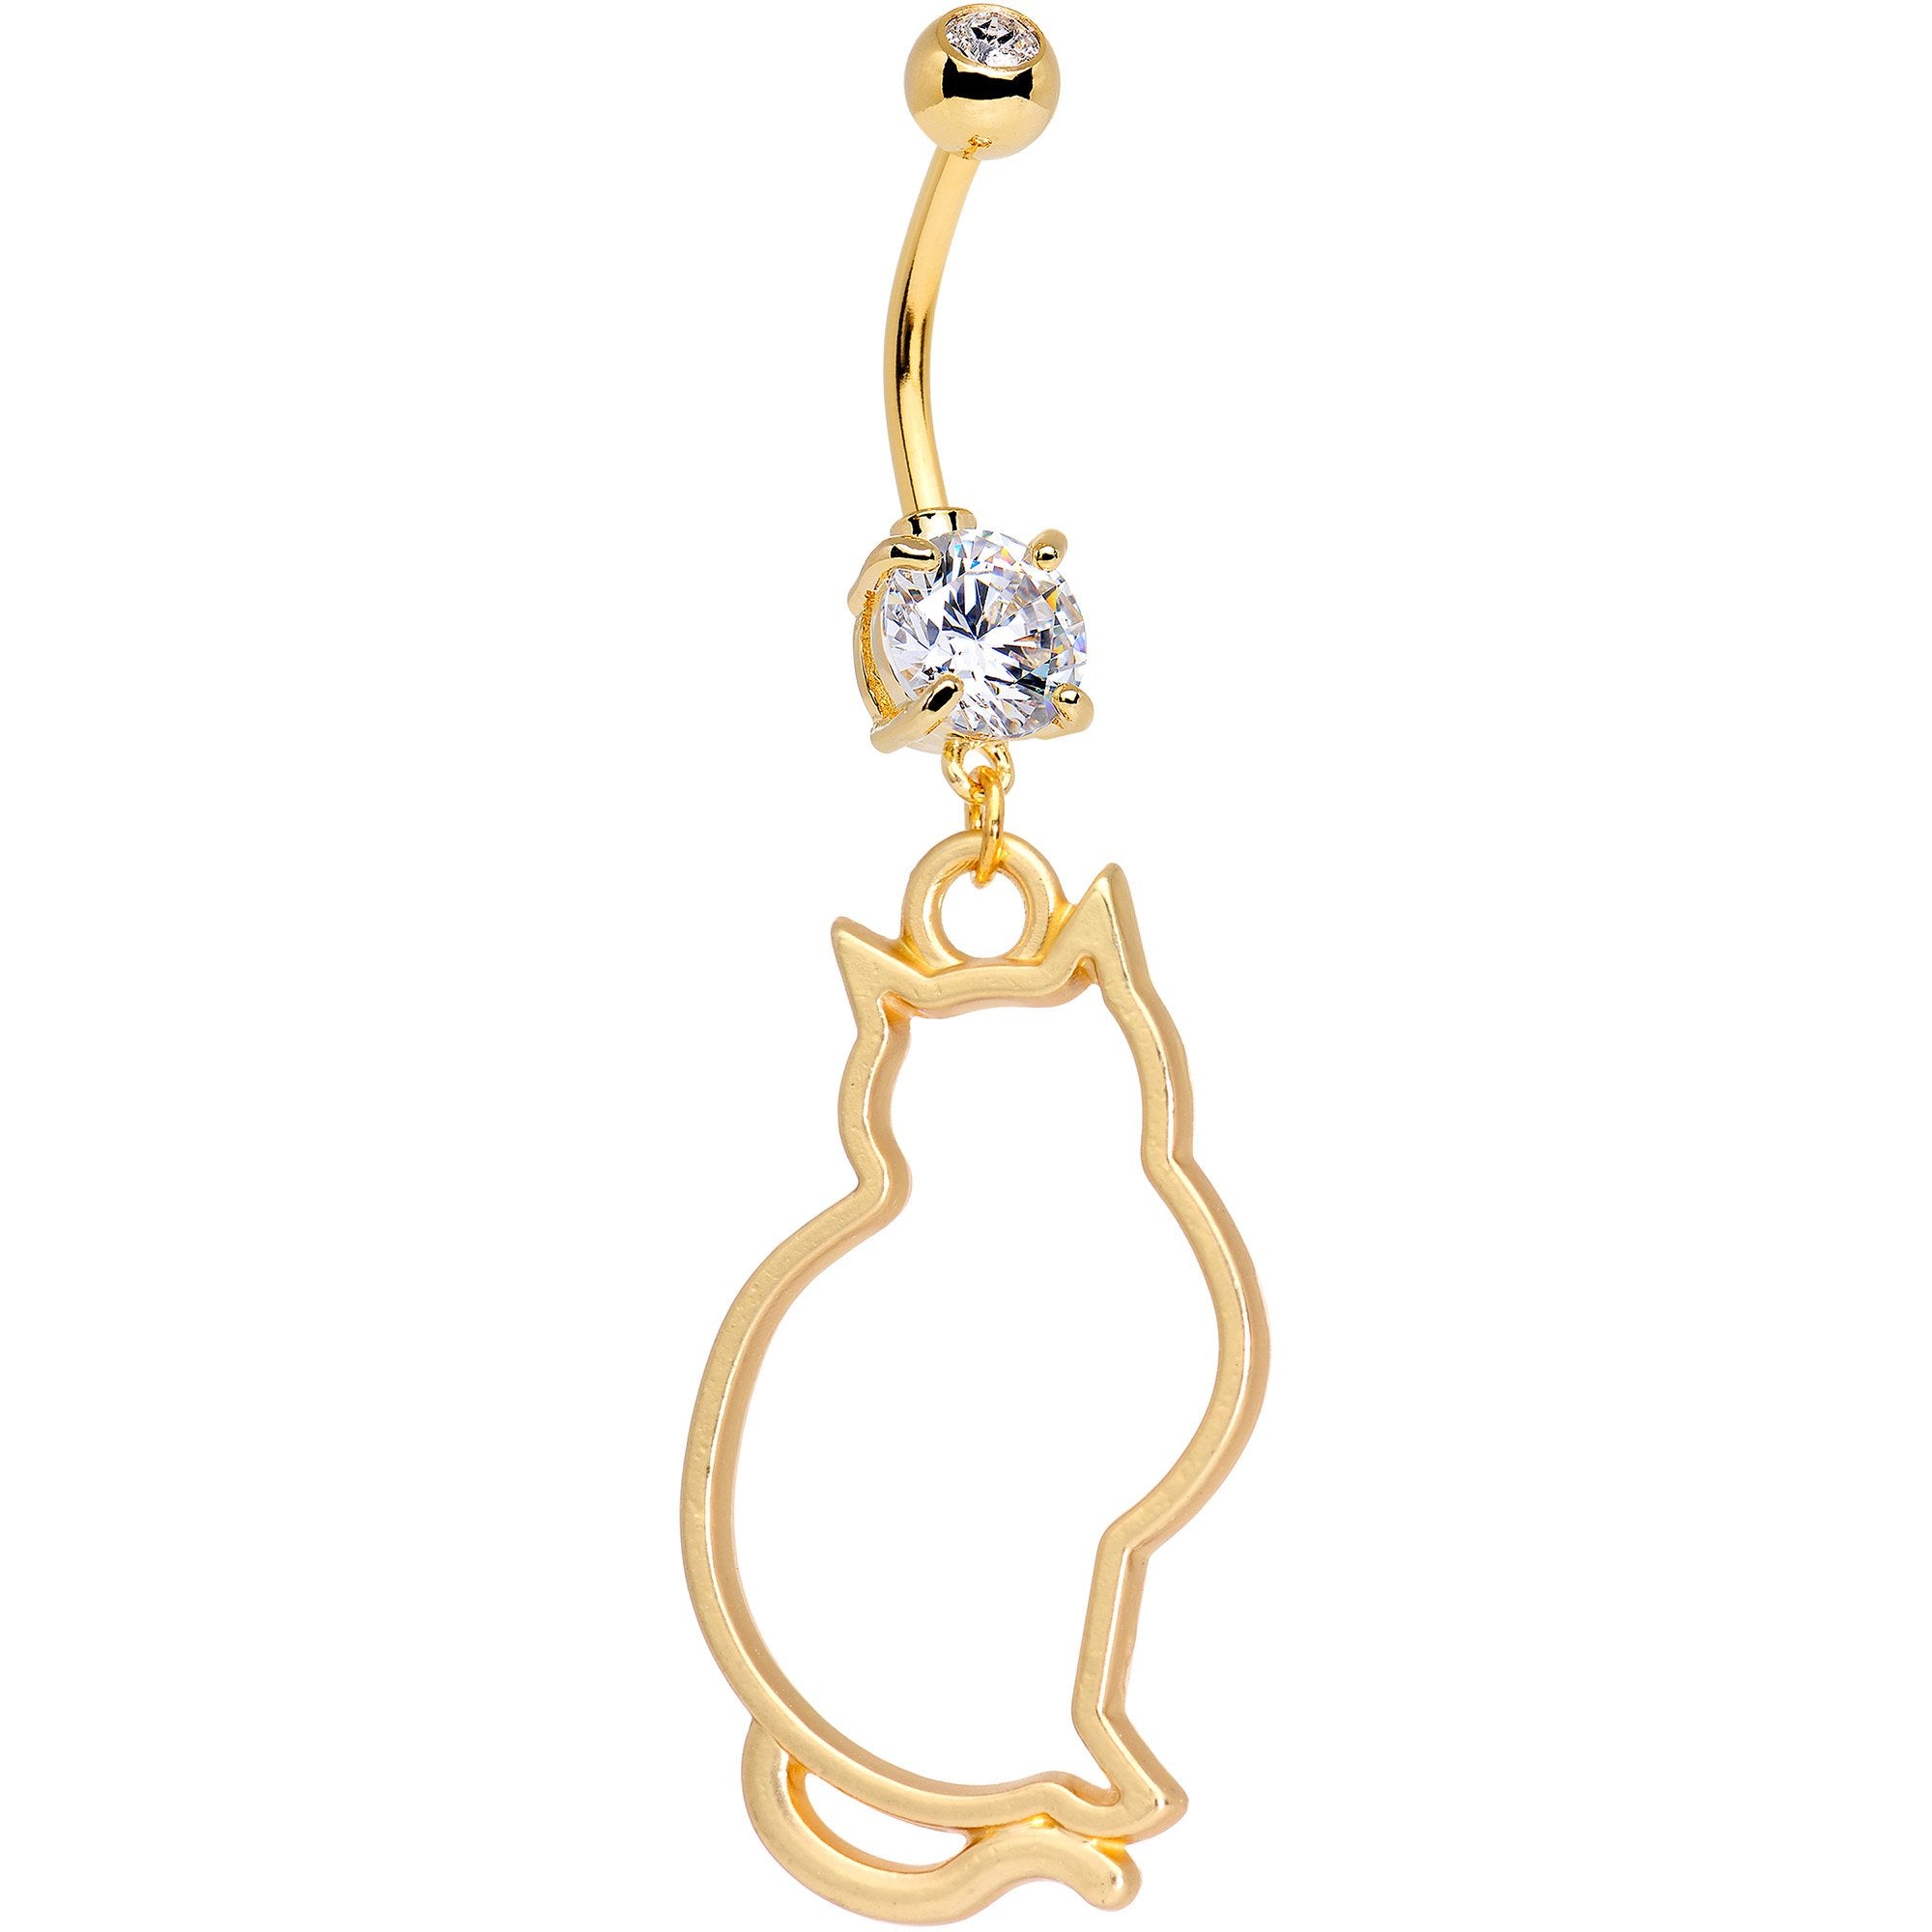 Handcrafted Gold Tone Anodized Kitty Cat Silhouette Dangle Belly Ring